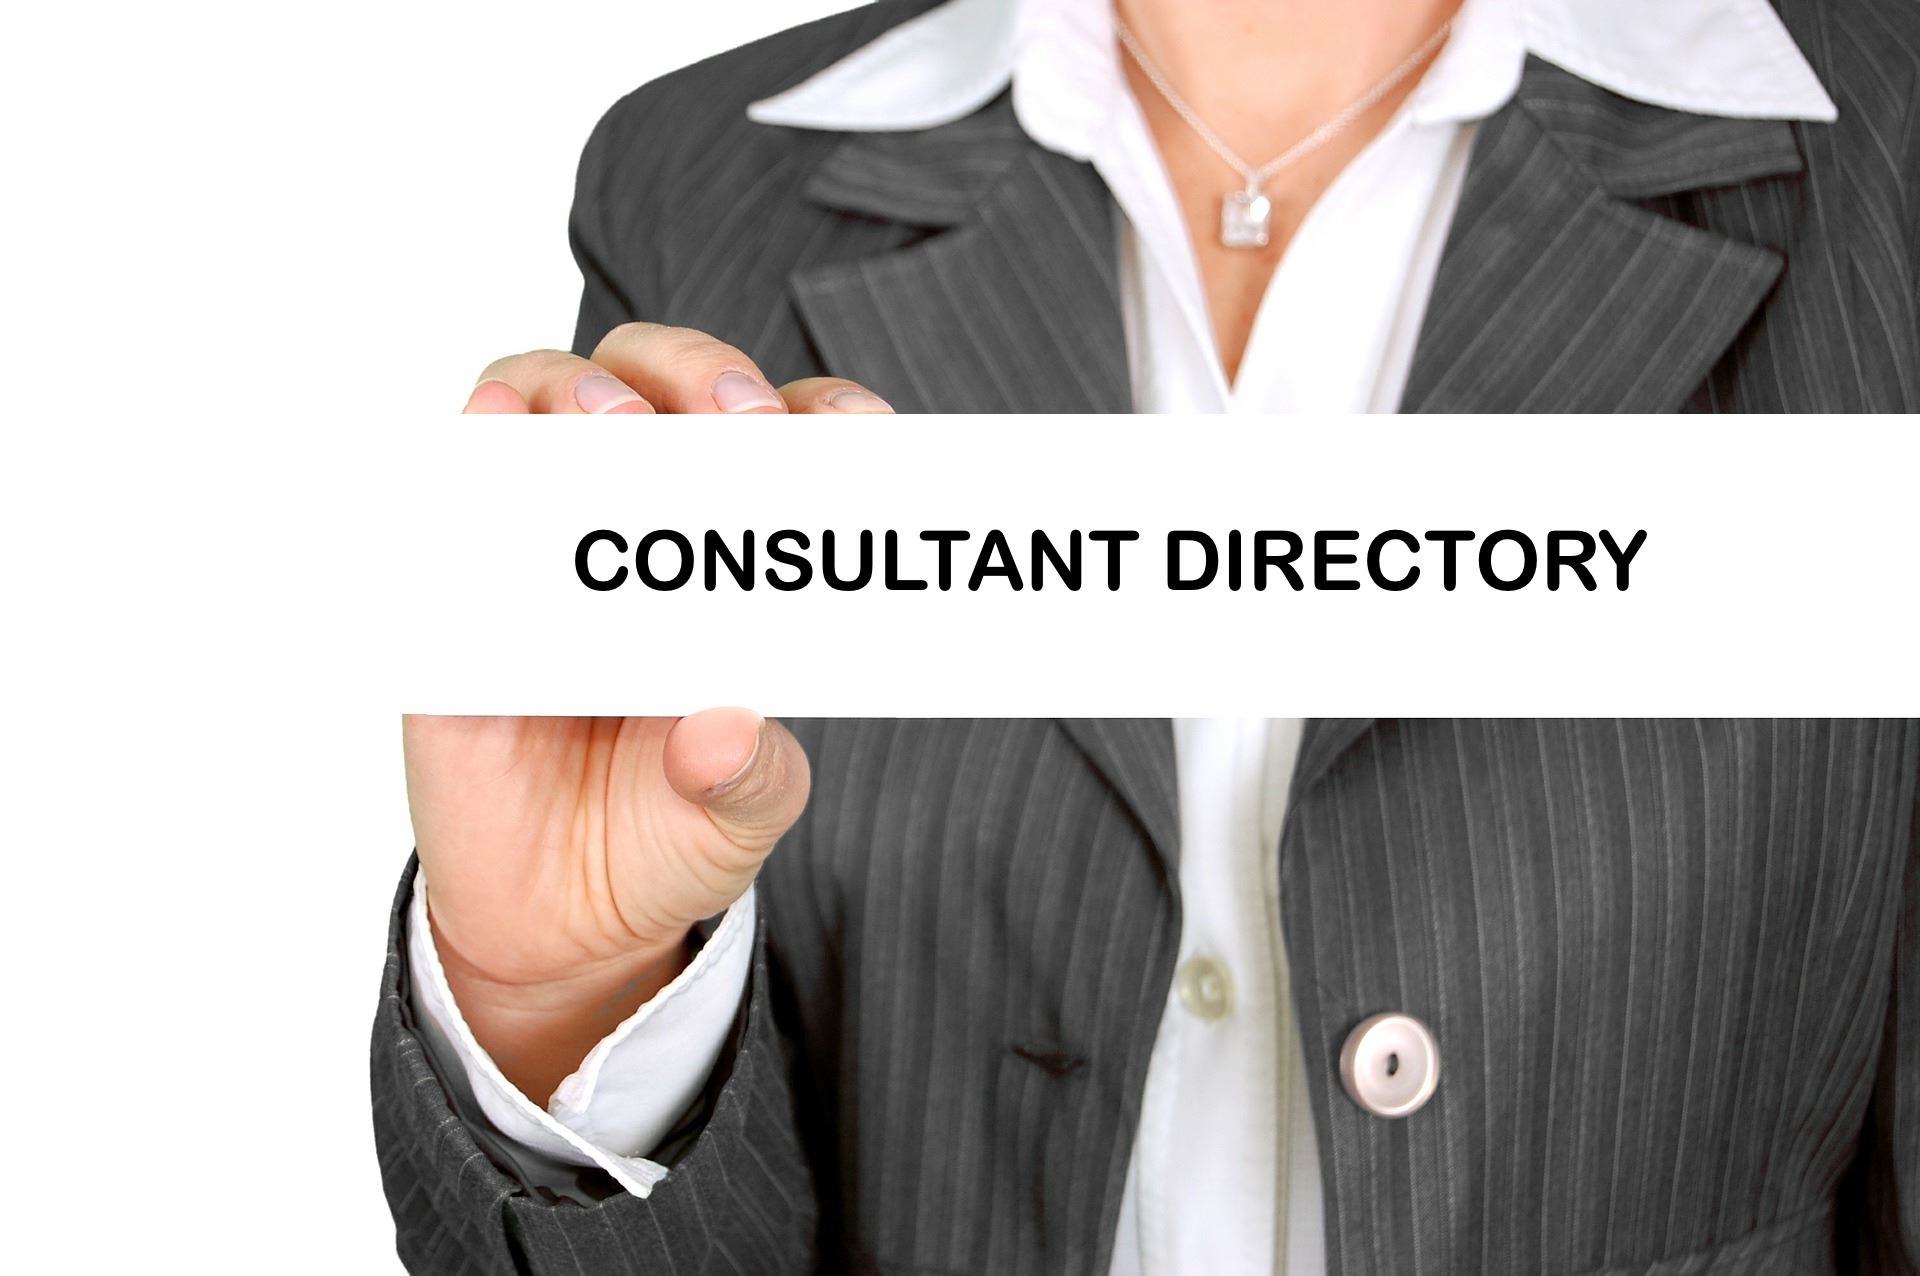 Consultant Directory Image